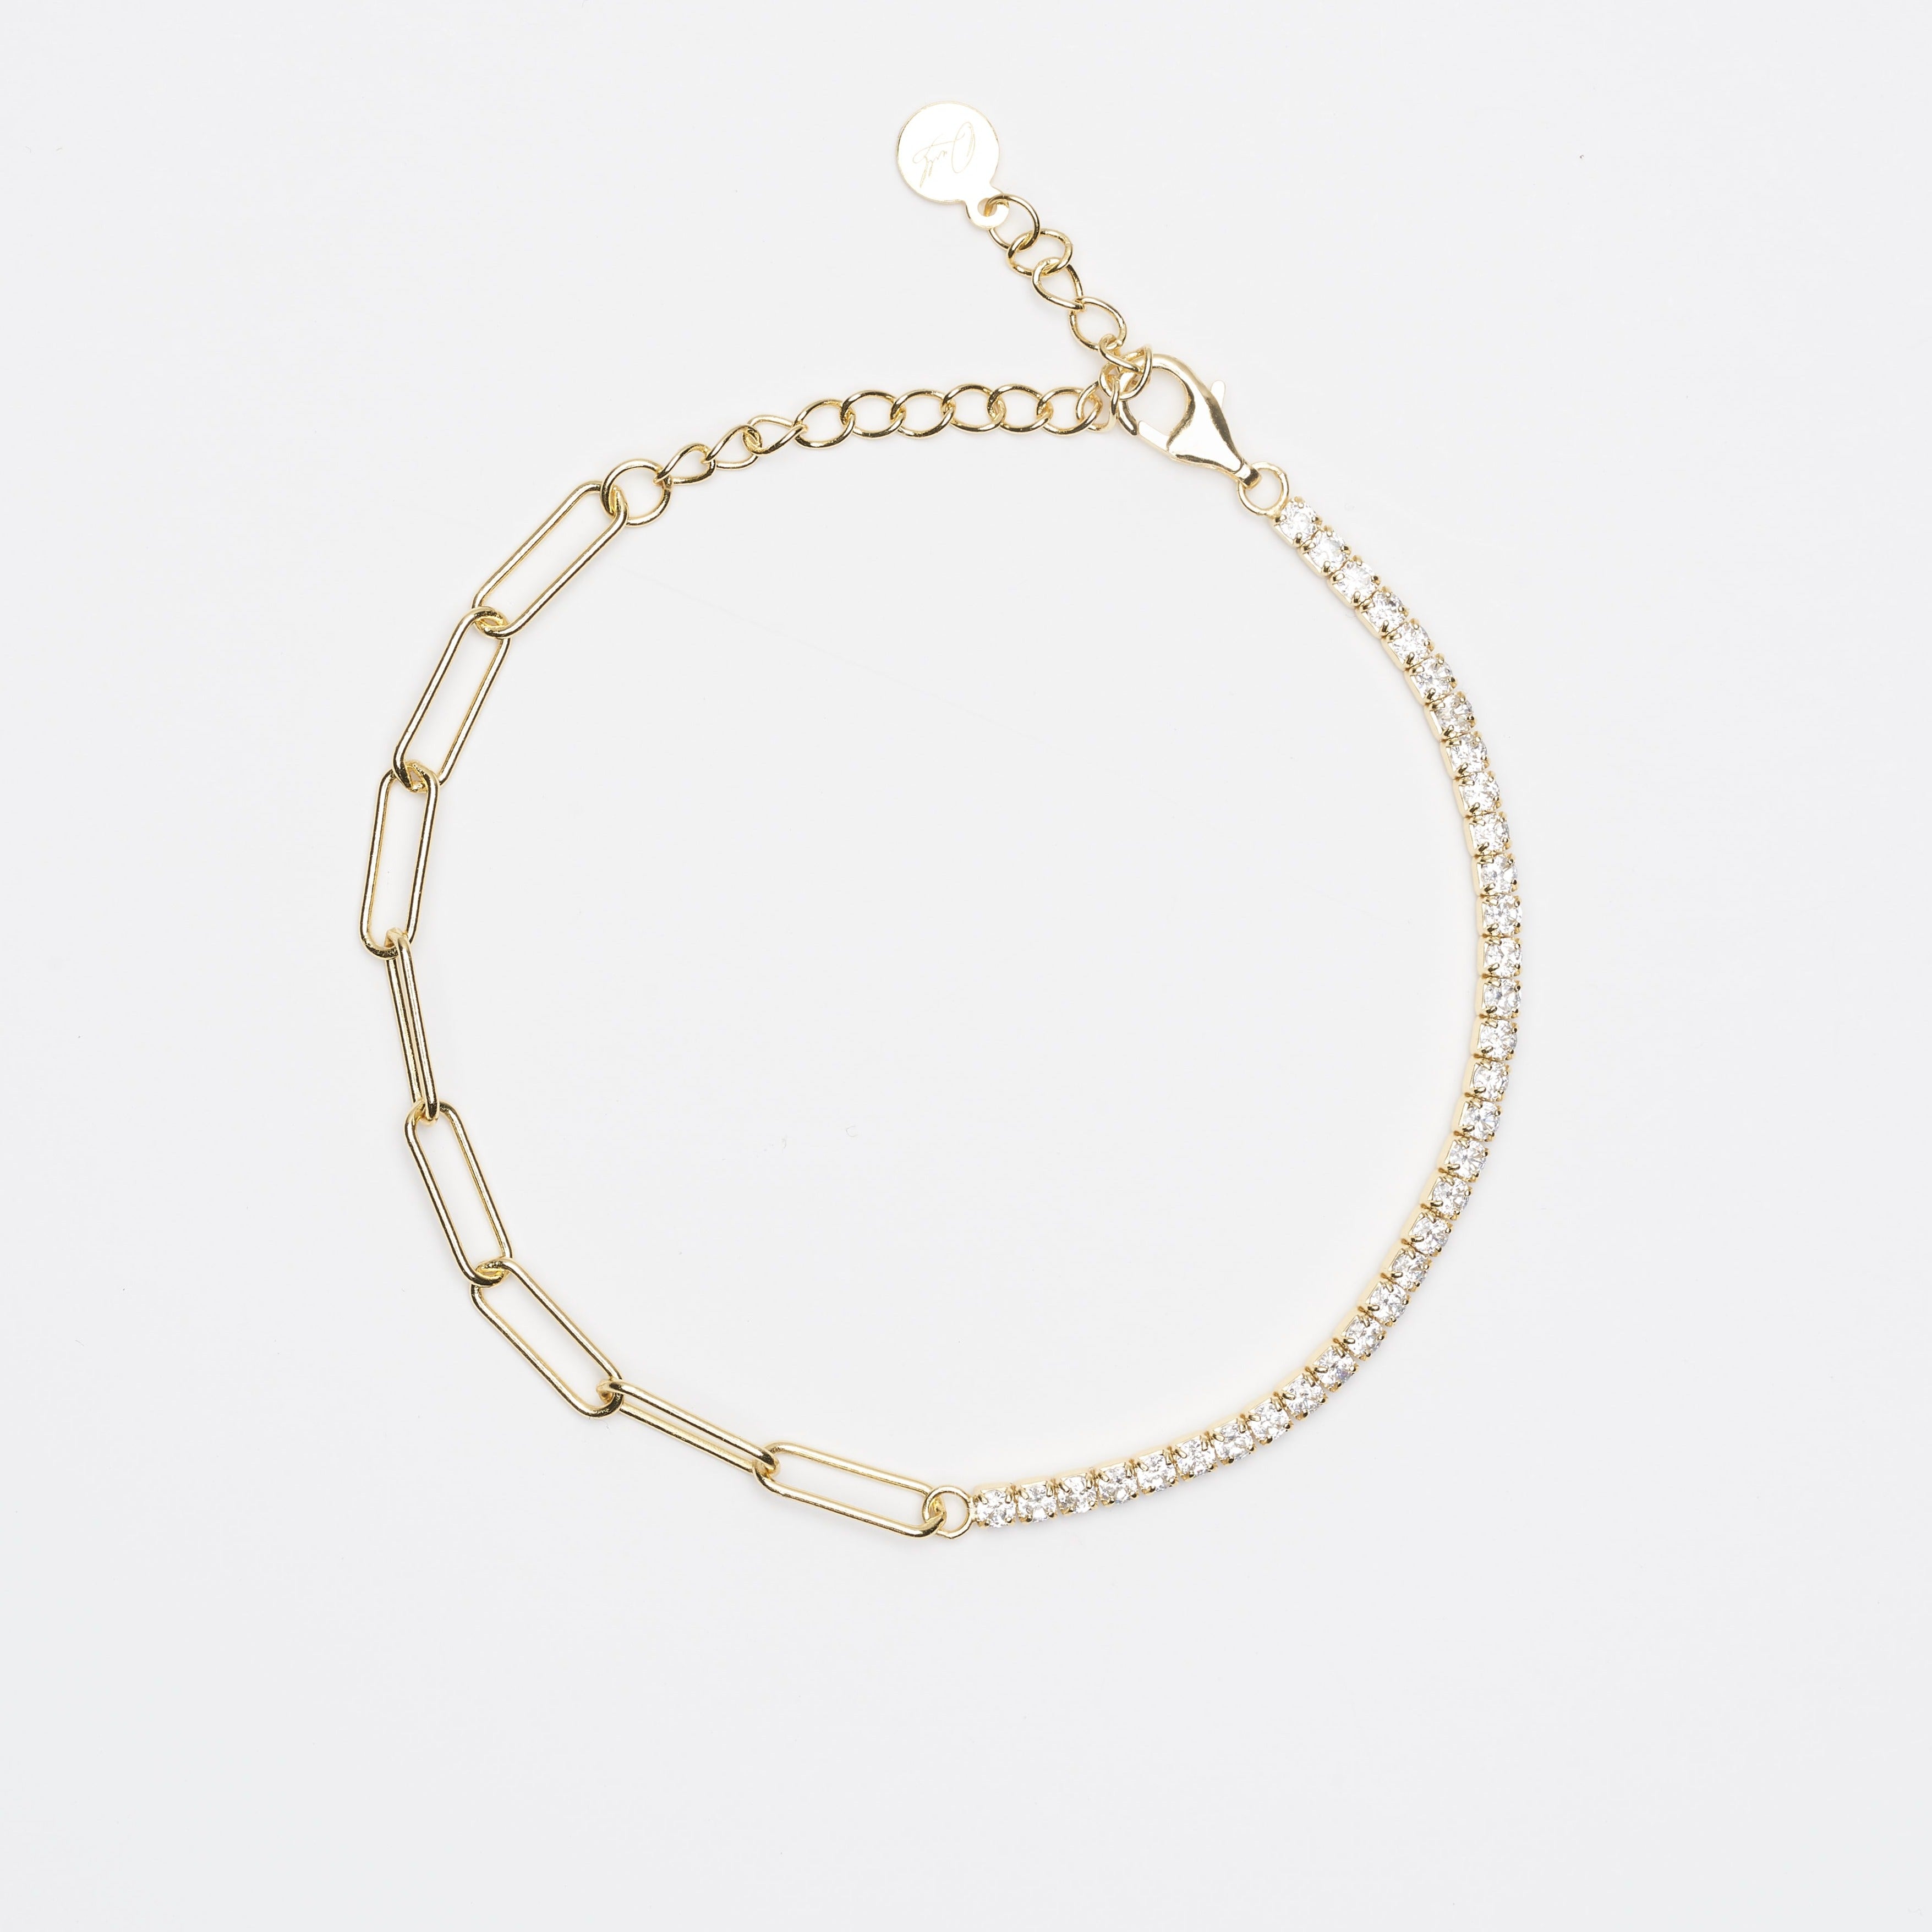 Naomi Gold Tennis Bracelet with Square Link Chain - P I C N I C 